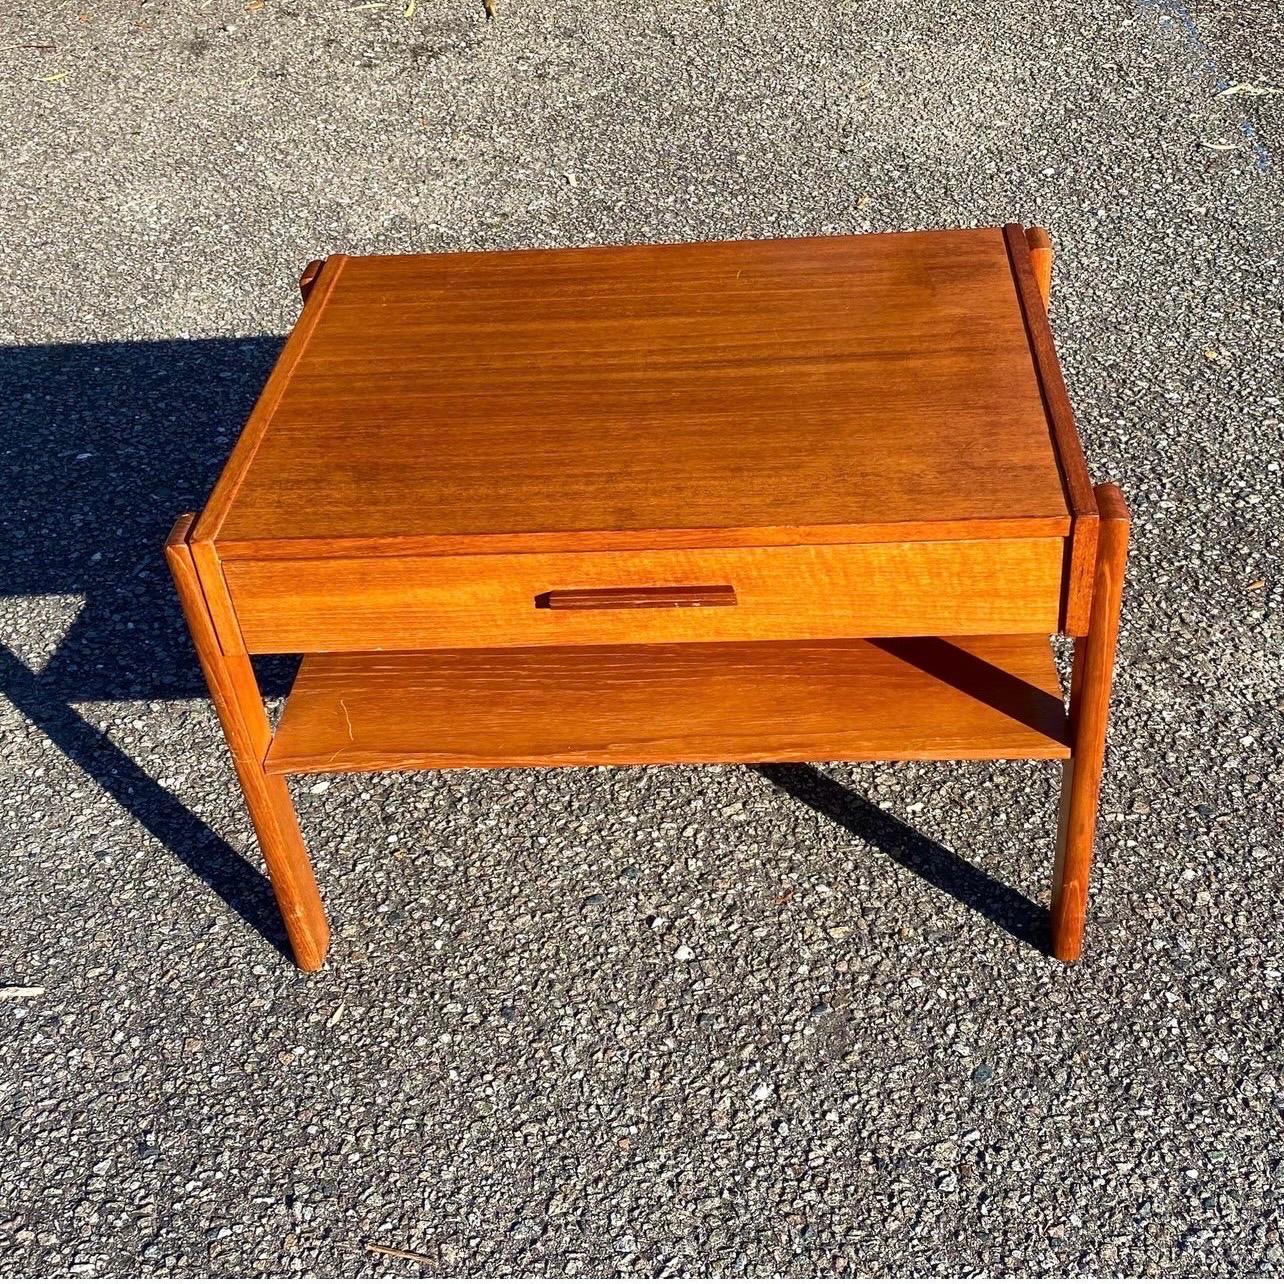 A sweet Danish teak side table with drawer and lower shelf. In very good vintage condition with a few small light scratches. Made in Denmark by Graebel.